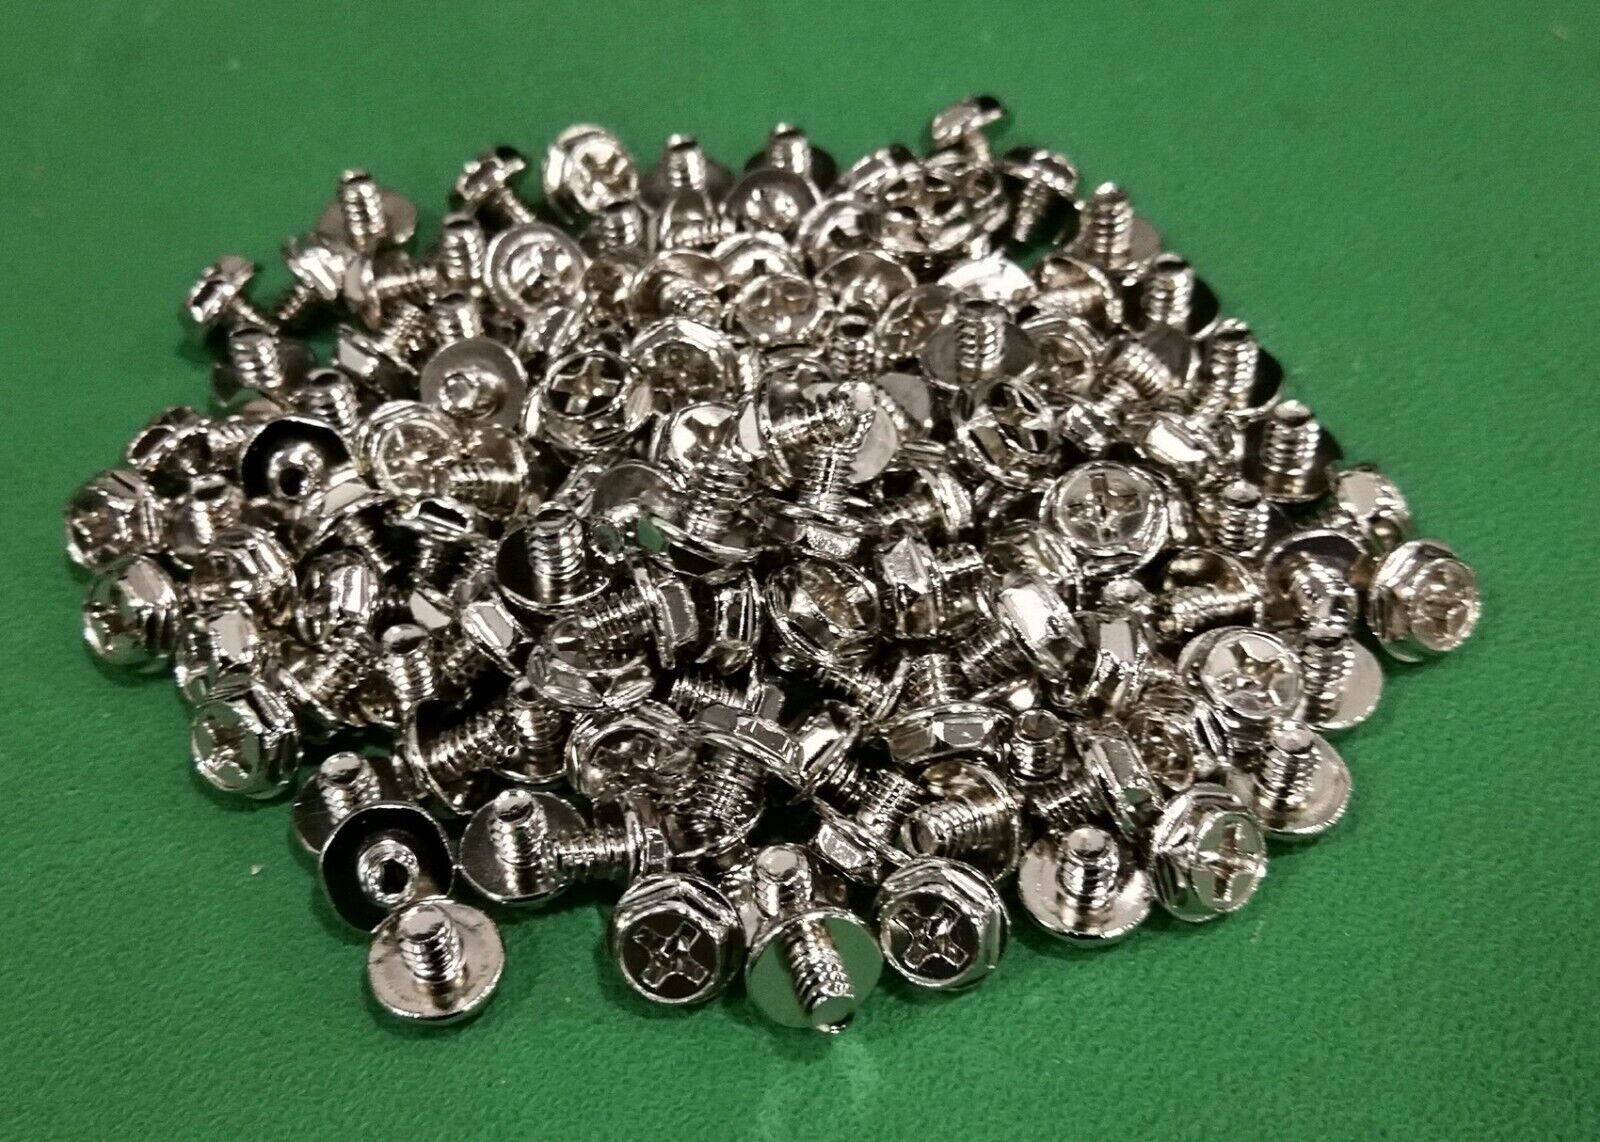 Hex Screws for motherboard, server/PC Chassis and hard disk, 160 PC